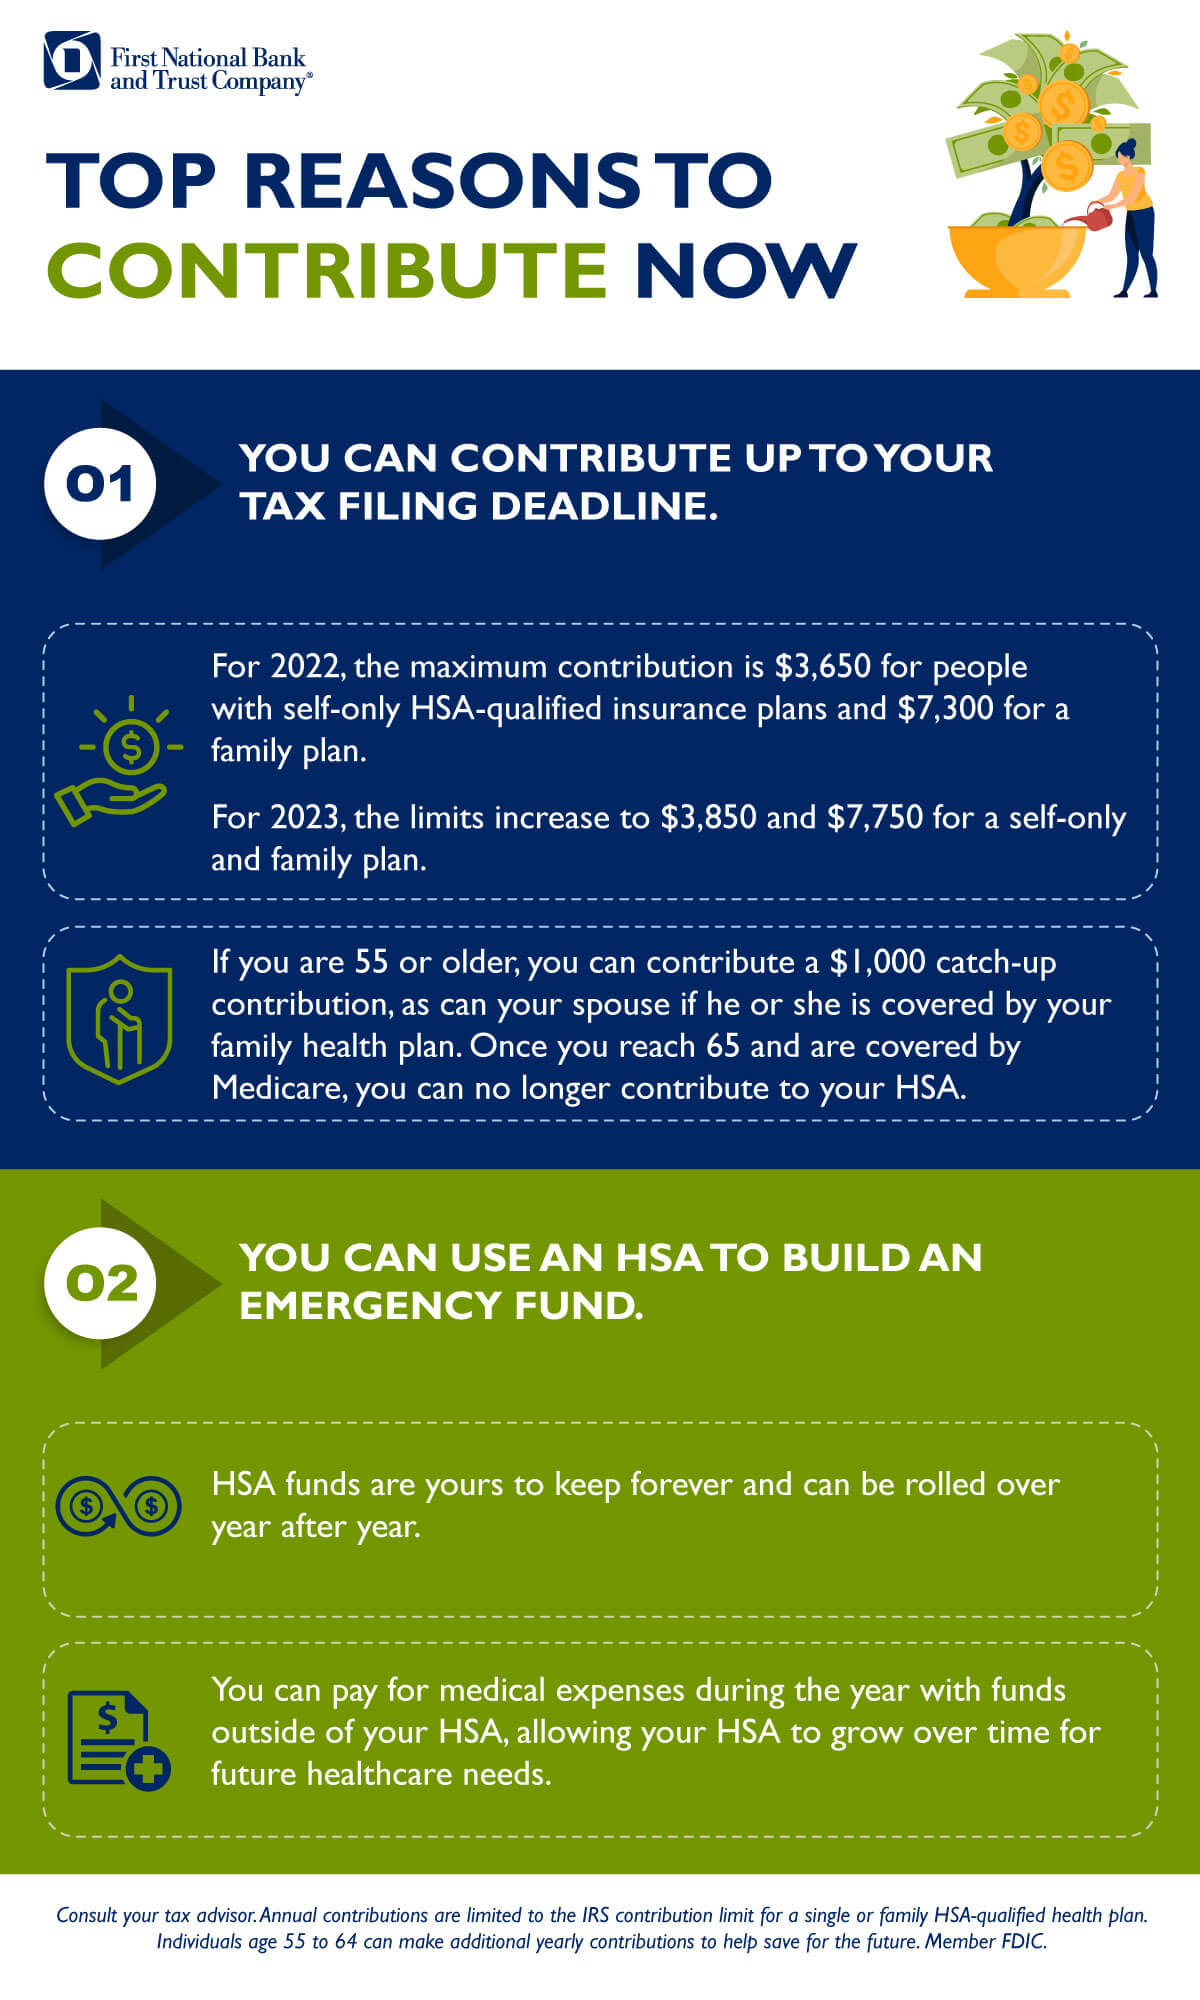 TOP REASONS TO CONTRIBUTE NOW    1. You can contribute up to your tax filing deadline. For 2022, the maximum contribution is $3,650 for people with self-only HSA-qualified insurance plans and $7,300 for a family plan. For 2023, the limits increase to $3850 and $7750 for a self-only and family plan.   2. If you are 55 or older  you can contribute a $1,000 catch-up contribution, as can your spouse if he or she is covered by your family health plan. Once you reach 65 and are covered by Medicare, you can no longer contribute to your HSA. You can use an HSA to build an emergency fund. HSA funds are yours to keep forever and can be rolled over year after year. You can pay for medical expenses during the year with funds outside of your HSA, allowing your HSA to grow over time for future healthcare needs.  *Consult your tax advisor. Annual contributions are limited to the IRS contribution limit for a single or family HSA-qualified health plan. Individuals age 55 to 64 can make additional yearly contributions to help save for the future. Member FDIC. 